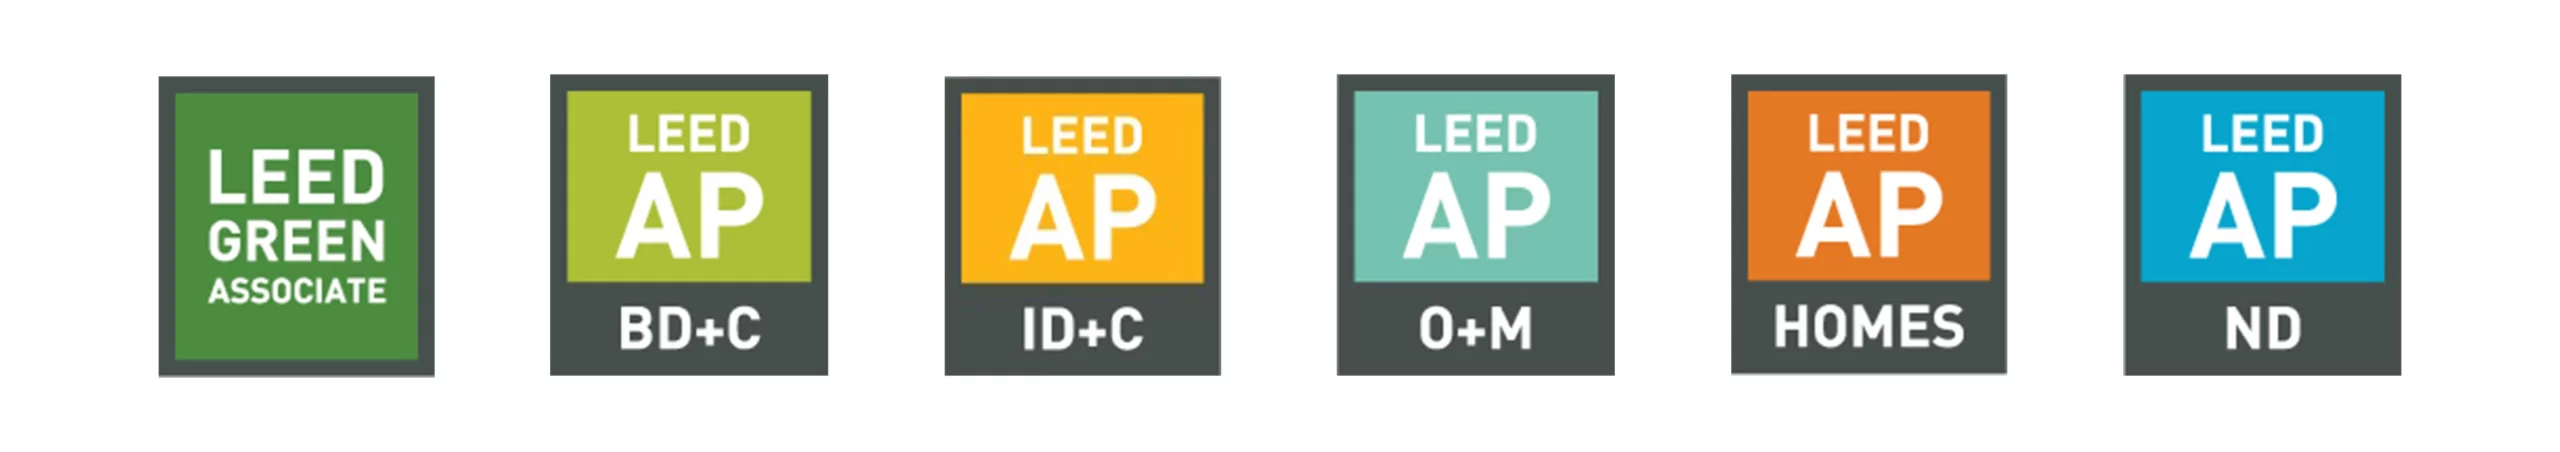 LEED green associate and LEED AP categories icons